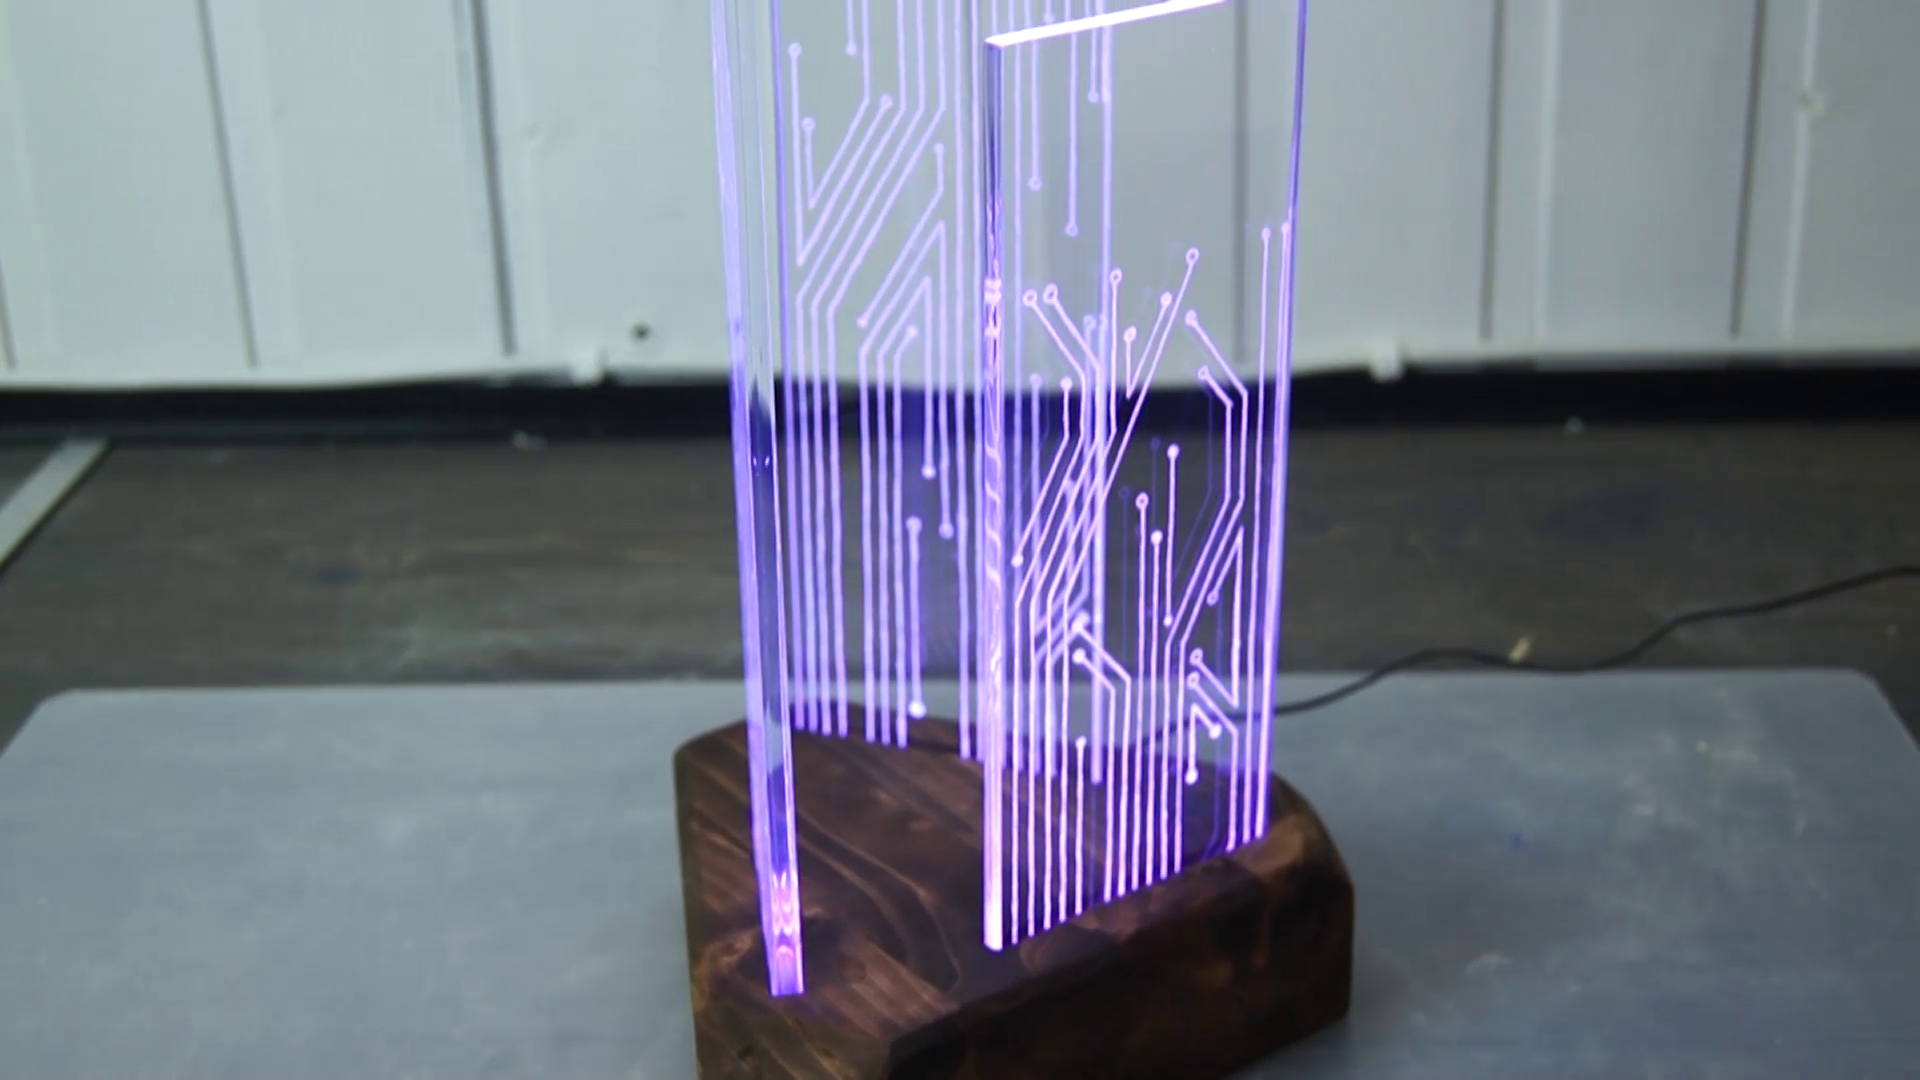 acrylic-led-lamp-pcb-inspired-colour-changing-rgb-2016-11-26-17h44m05s376.png